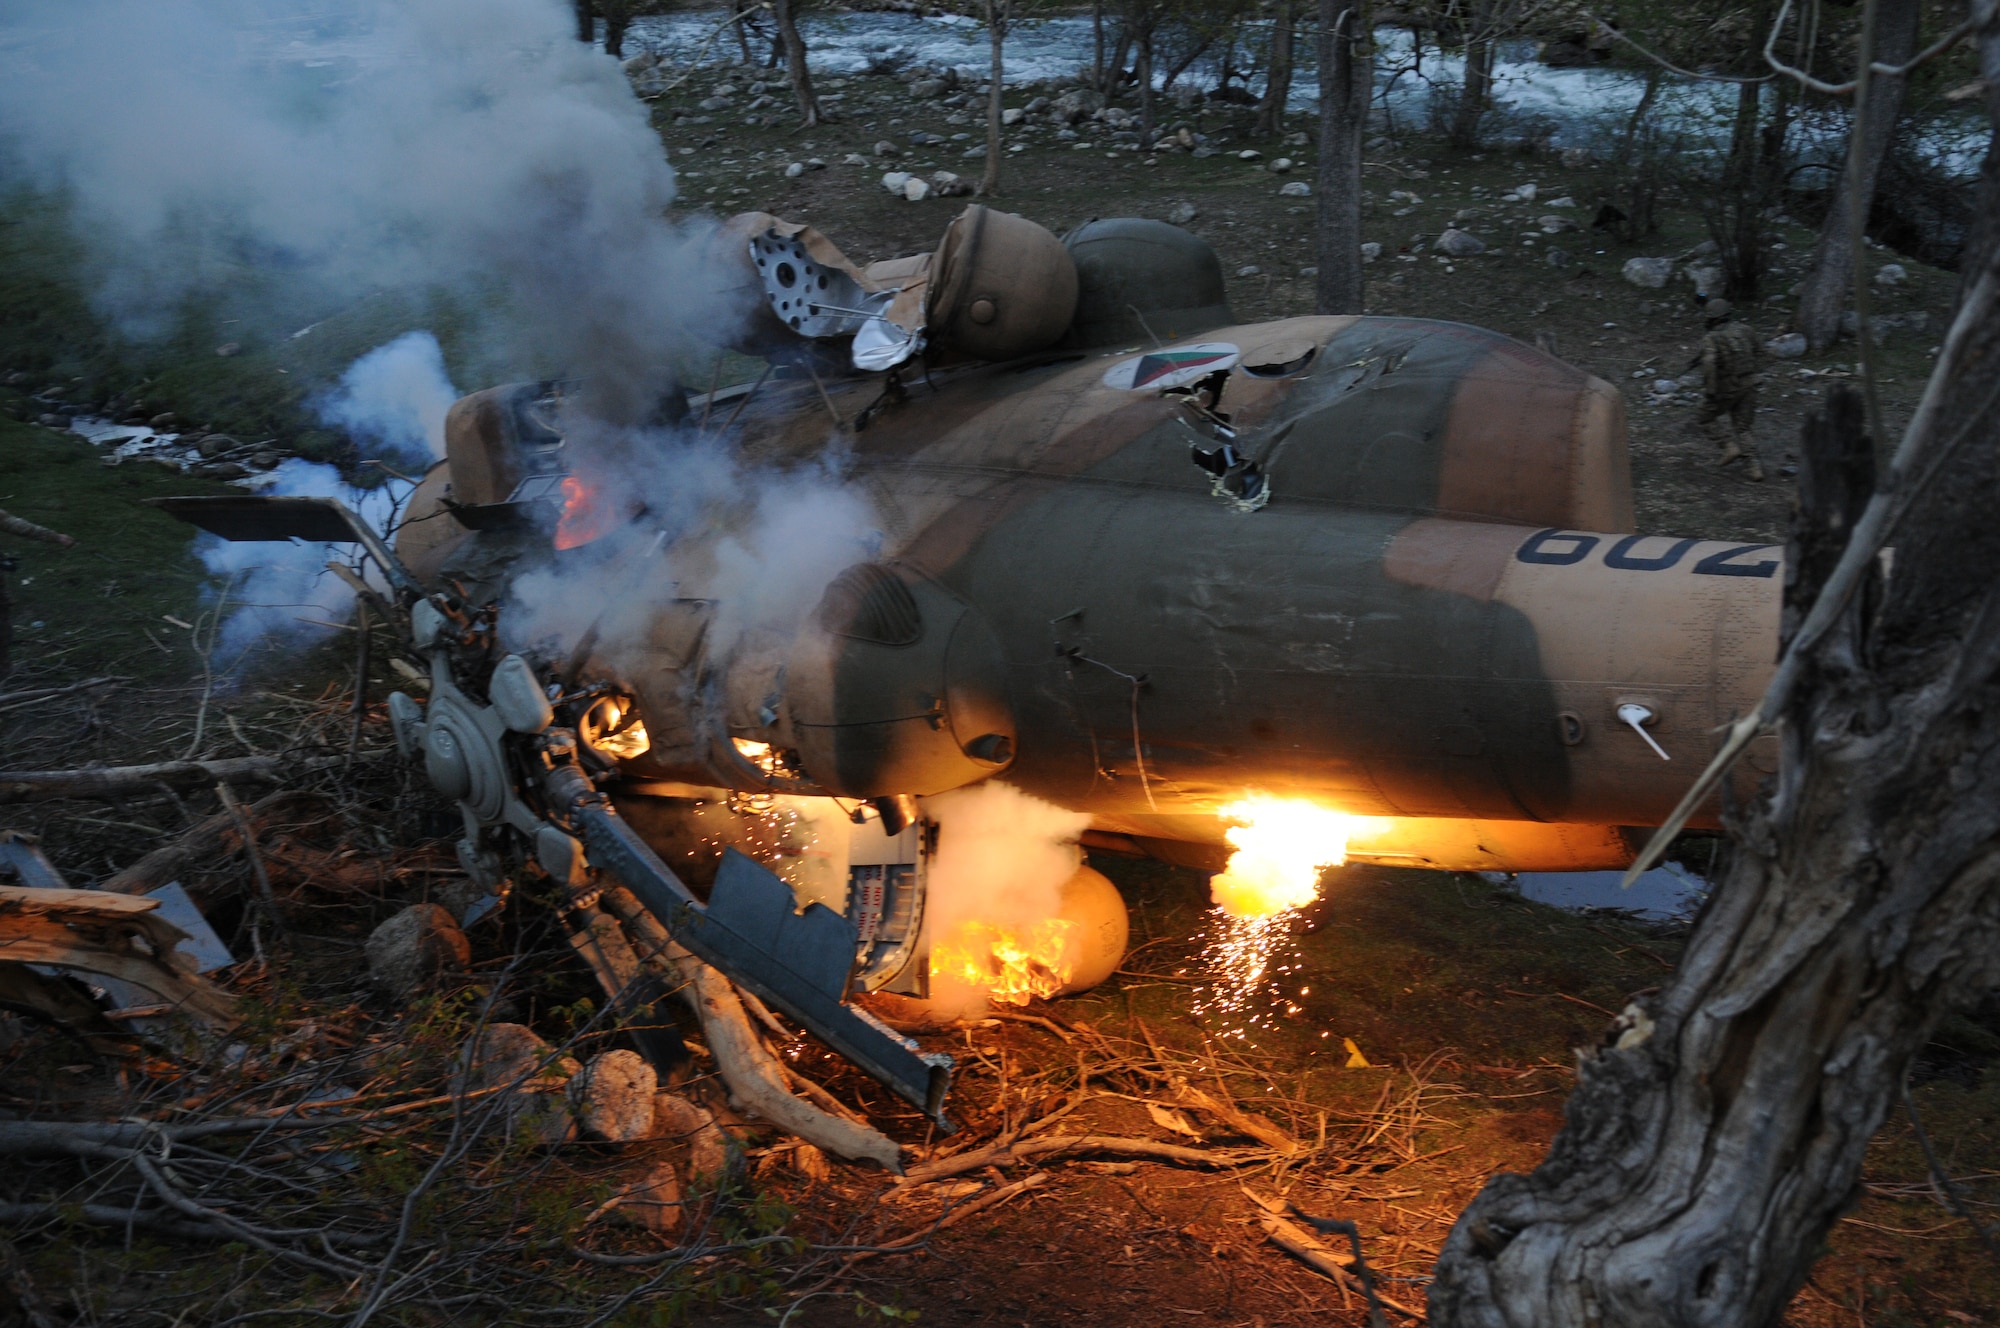 Nuristan,  Afghanistan. Army Pathfinders of Fox Company, 2nd Battalion, 10th Combat Aviation Brigade Fort Drum, NY watch as an Afghan Air Force Mi-17 helicopter burns from phosphorus grenades in the Nuristan province, Afghanistan. The Pathfinders were tasked to provide security around the perimeter and disassemble the crashed aircraft, and remove sensitve items to be sling loaded by a CH-47 Chinook and taken to an airbase. Photo by Tech Sgt. Brian E. Christiansen.